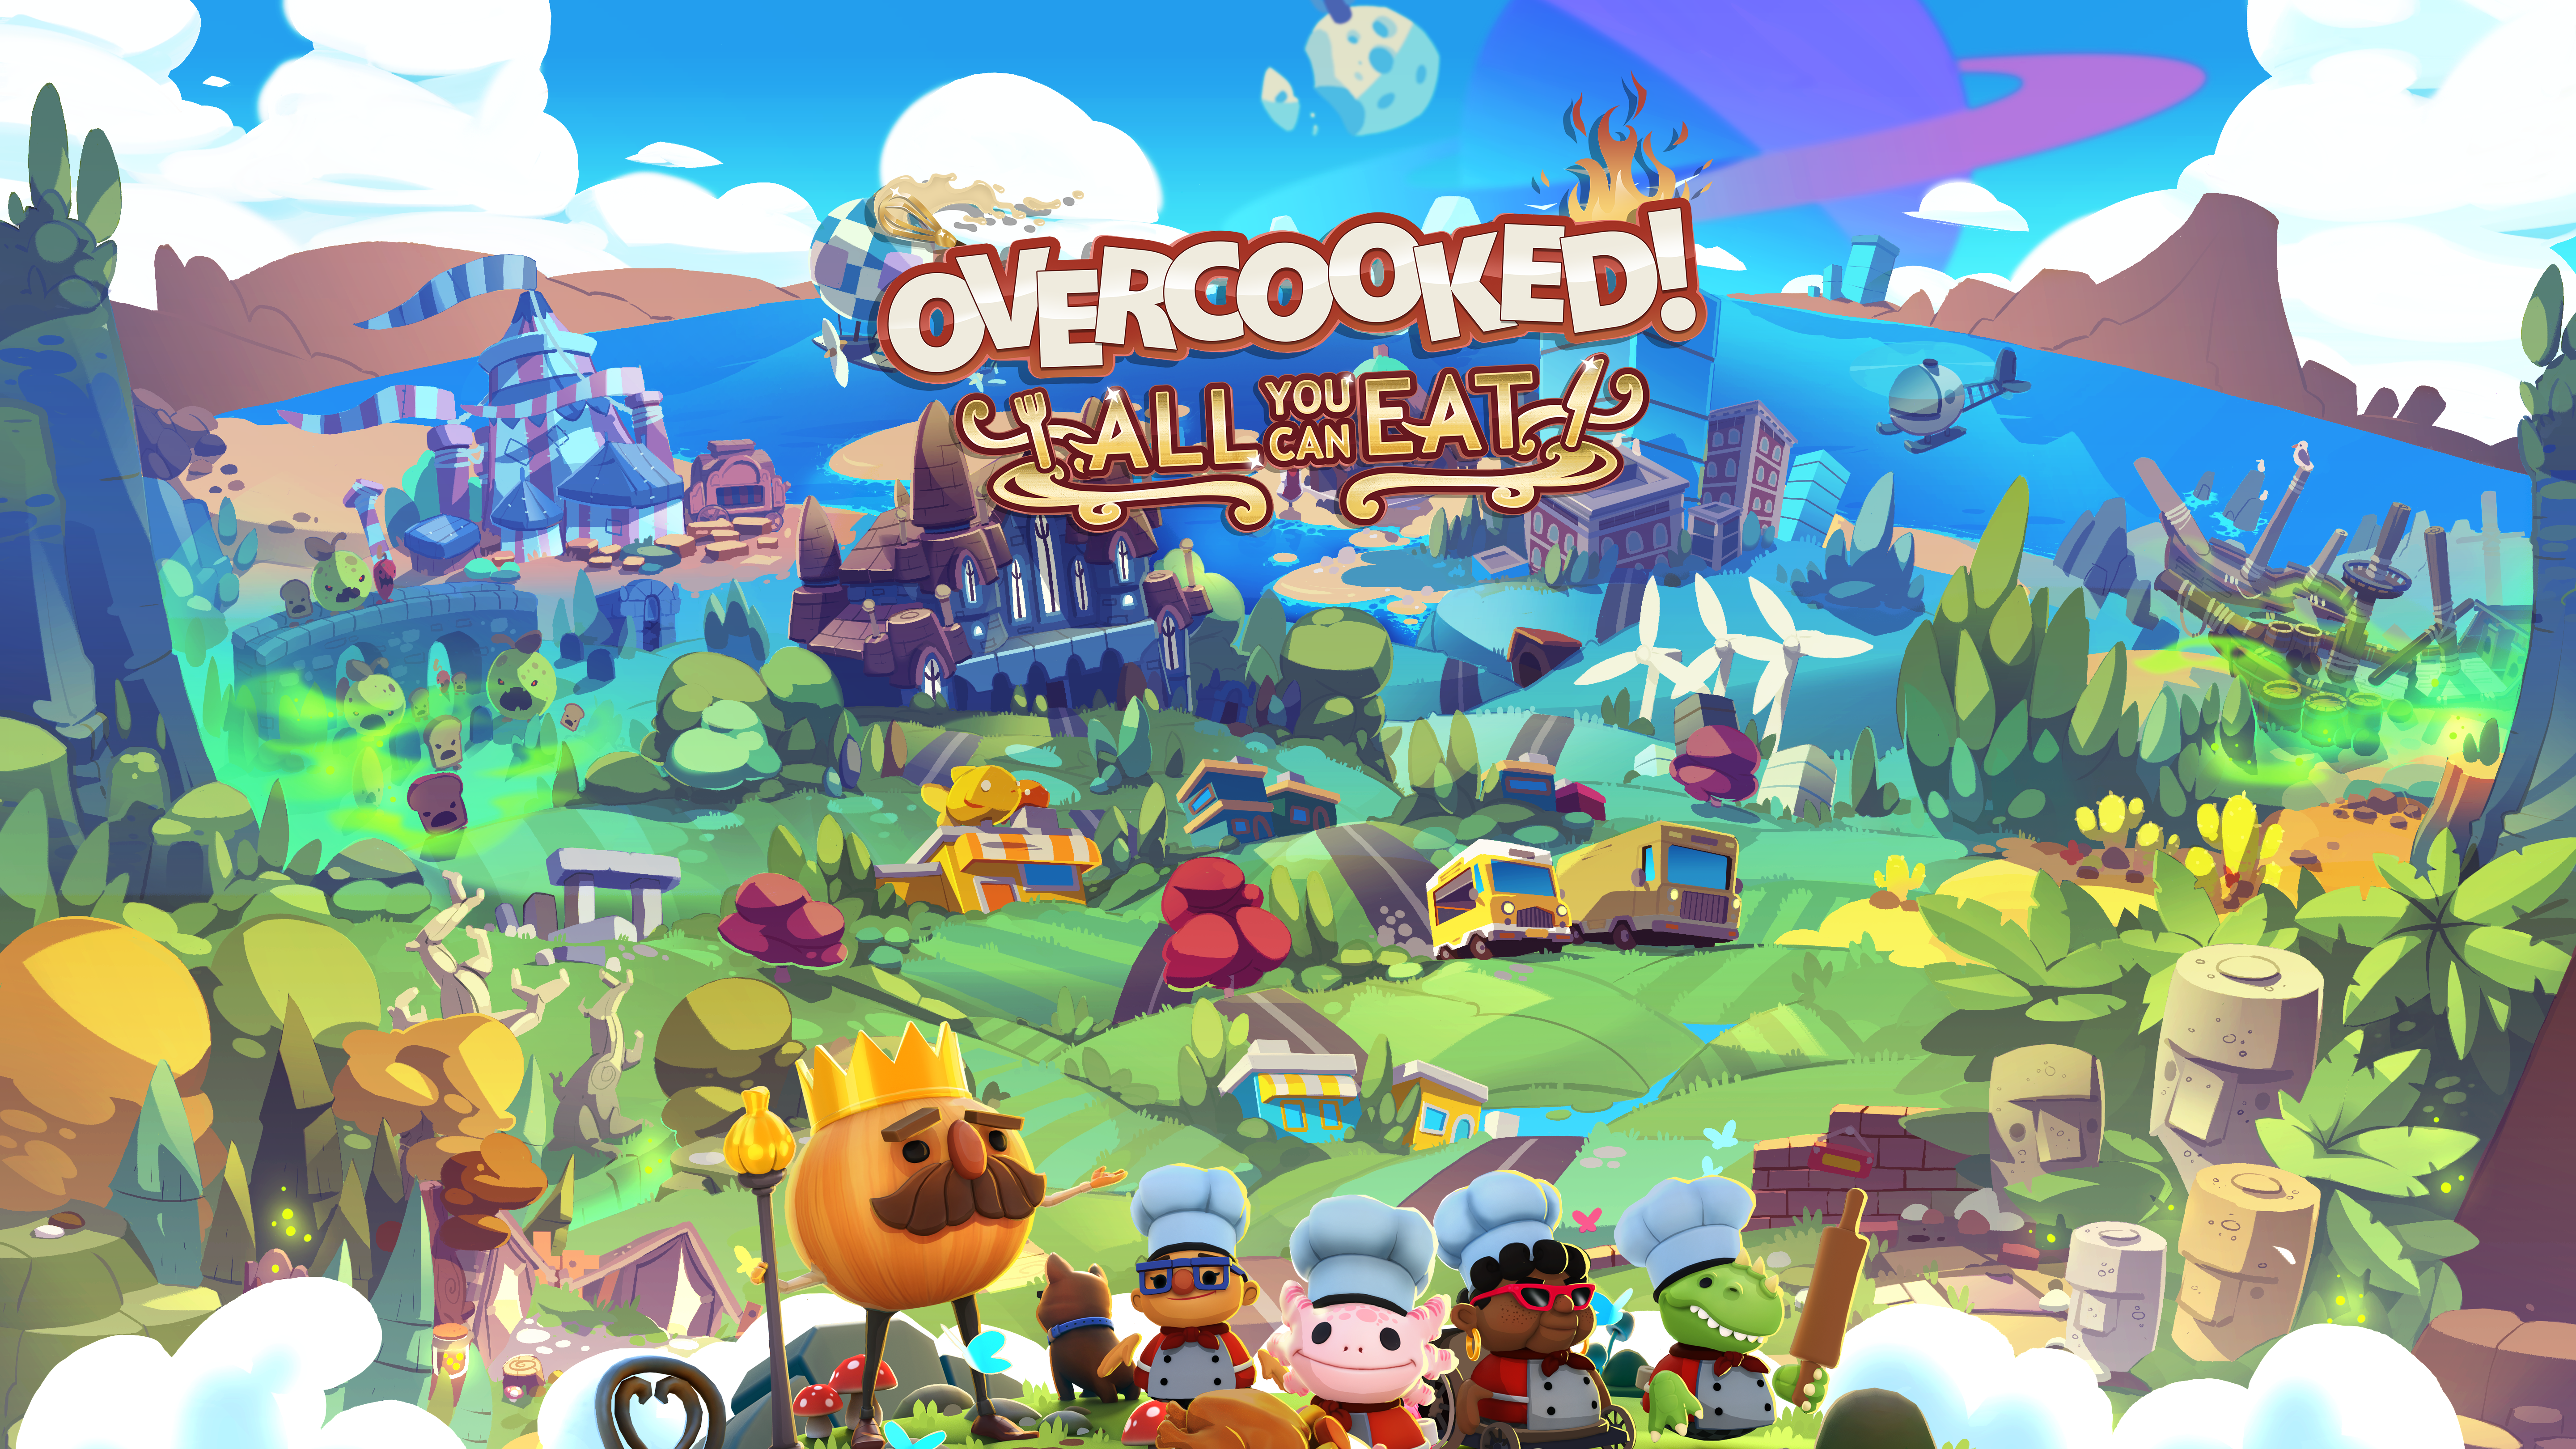 Big landscape of Overcooked characters